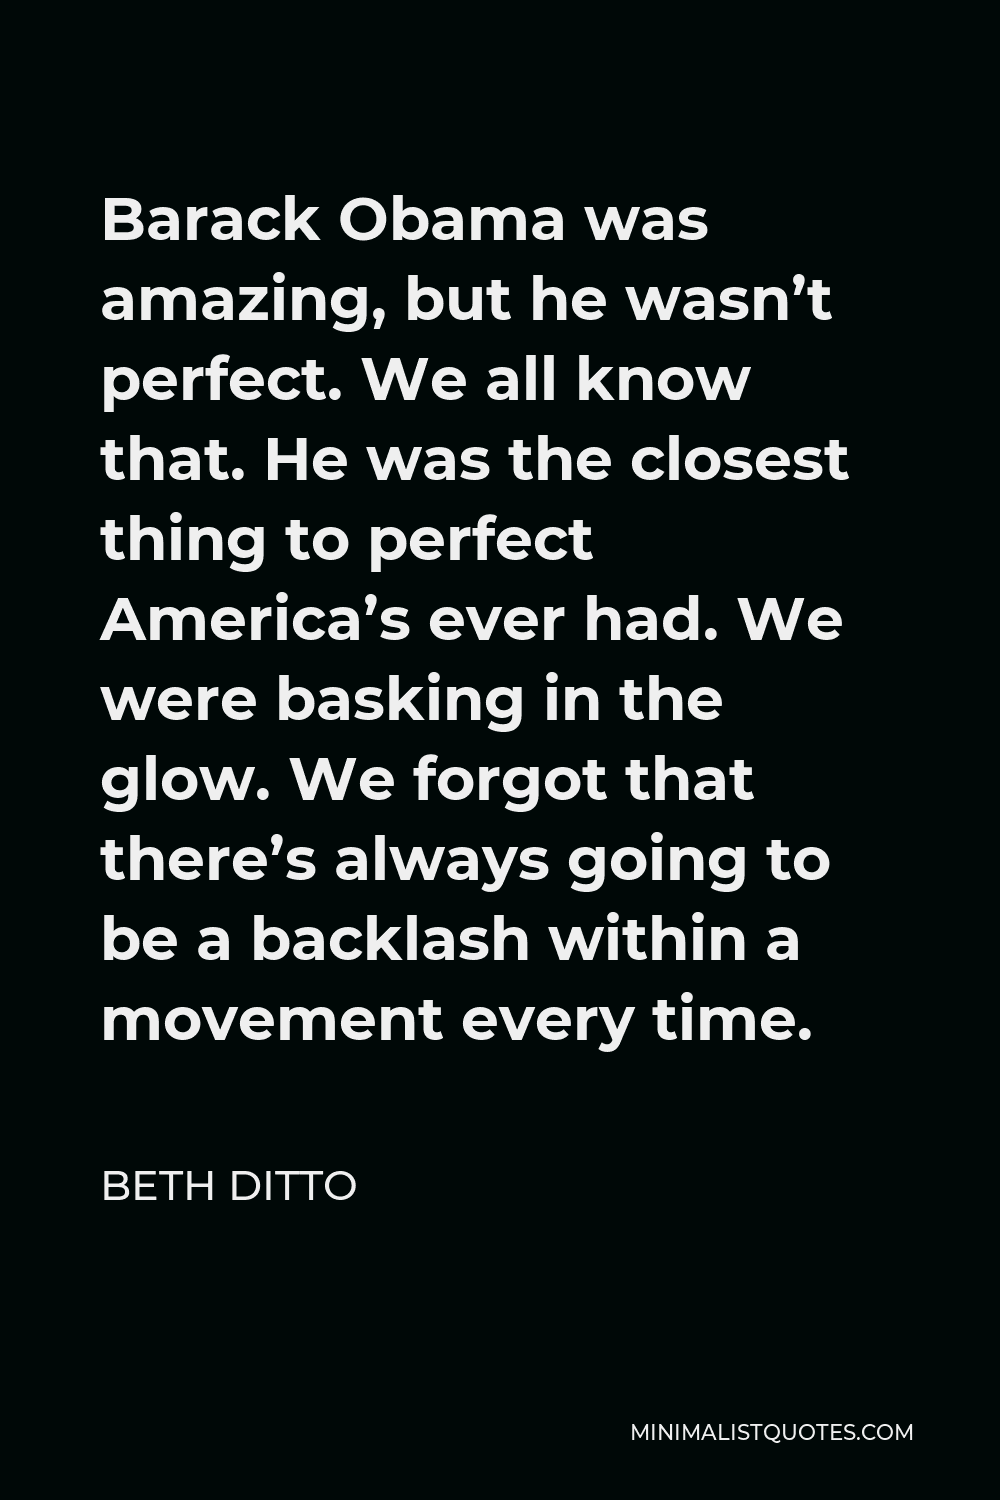 Beth Ditto Quote - Barack Obama was amazing, but he wasn’t perfect. We all know that. He was the closest thing to perfect America’s ever had. We were basking in the glow. We forgot that there’s always going to be a backlash within a movement every time.